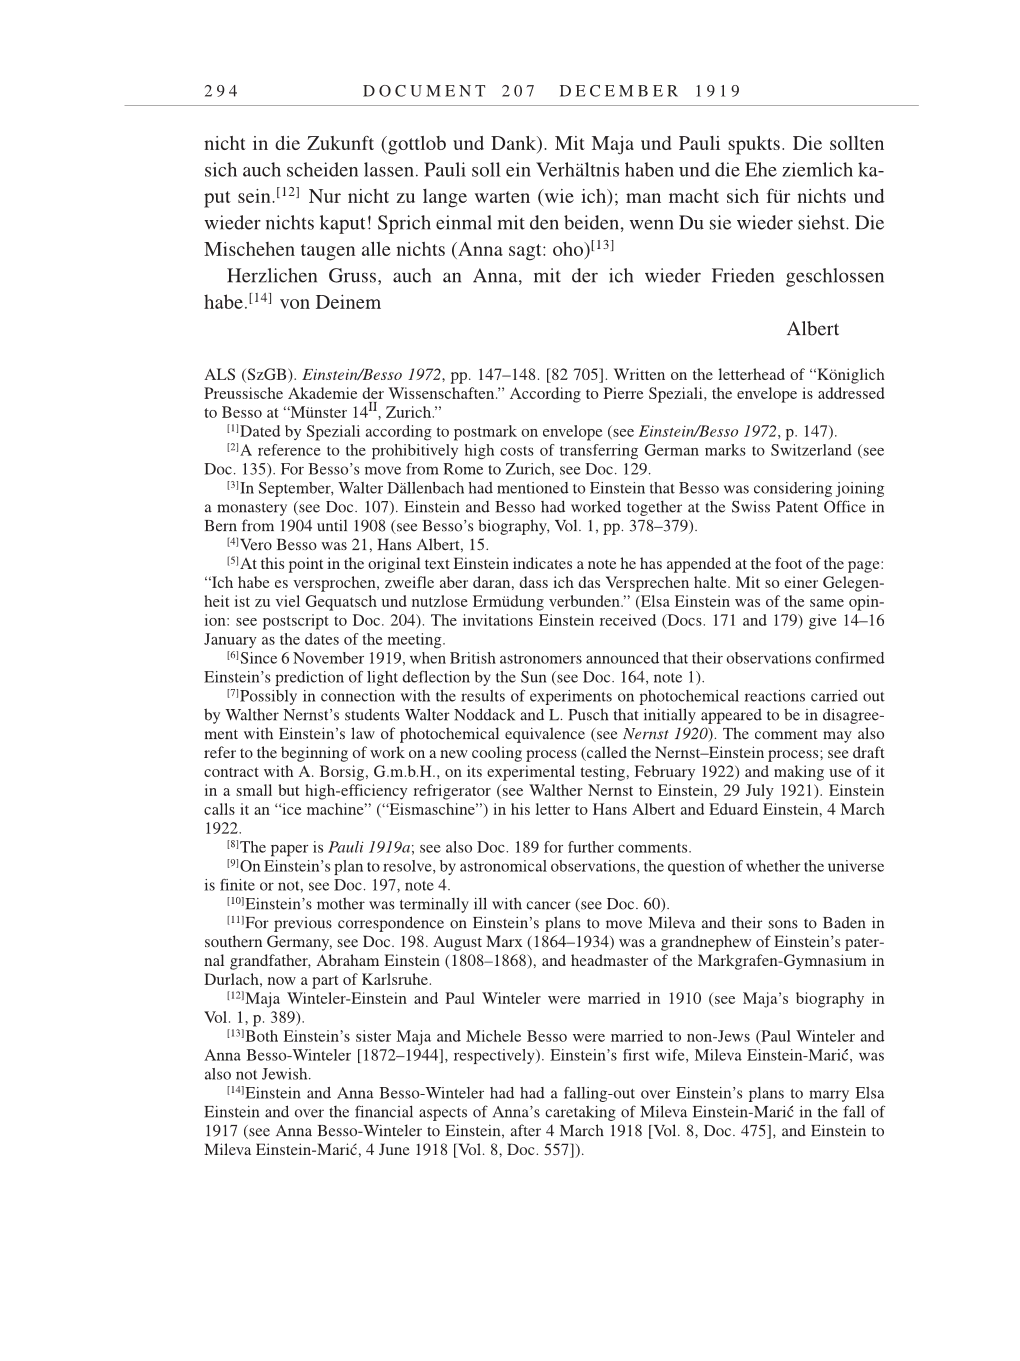 Volume 9: The Berlin Years: Correspondence January 1919-April 1920 page 294